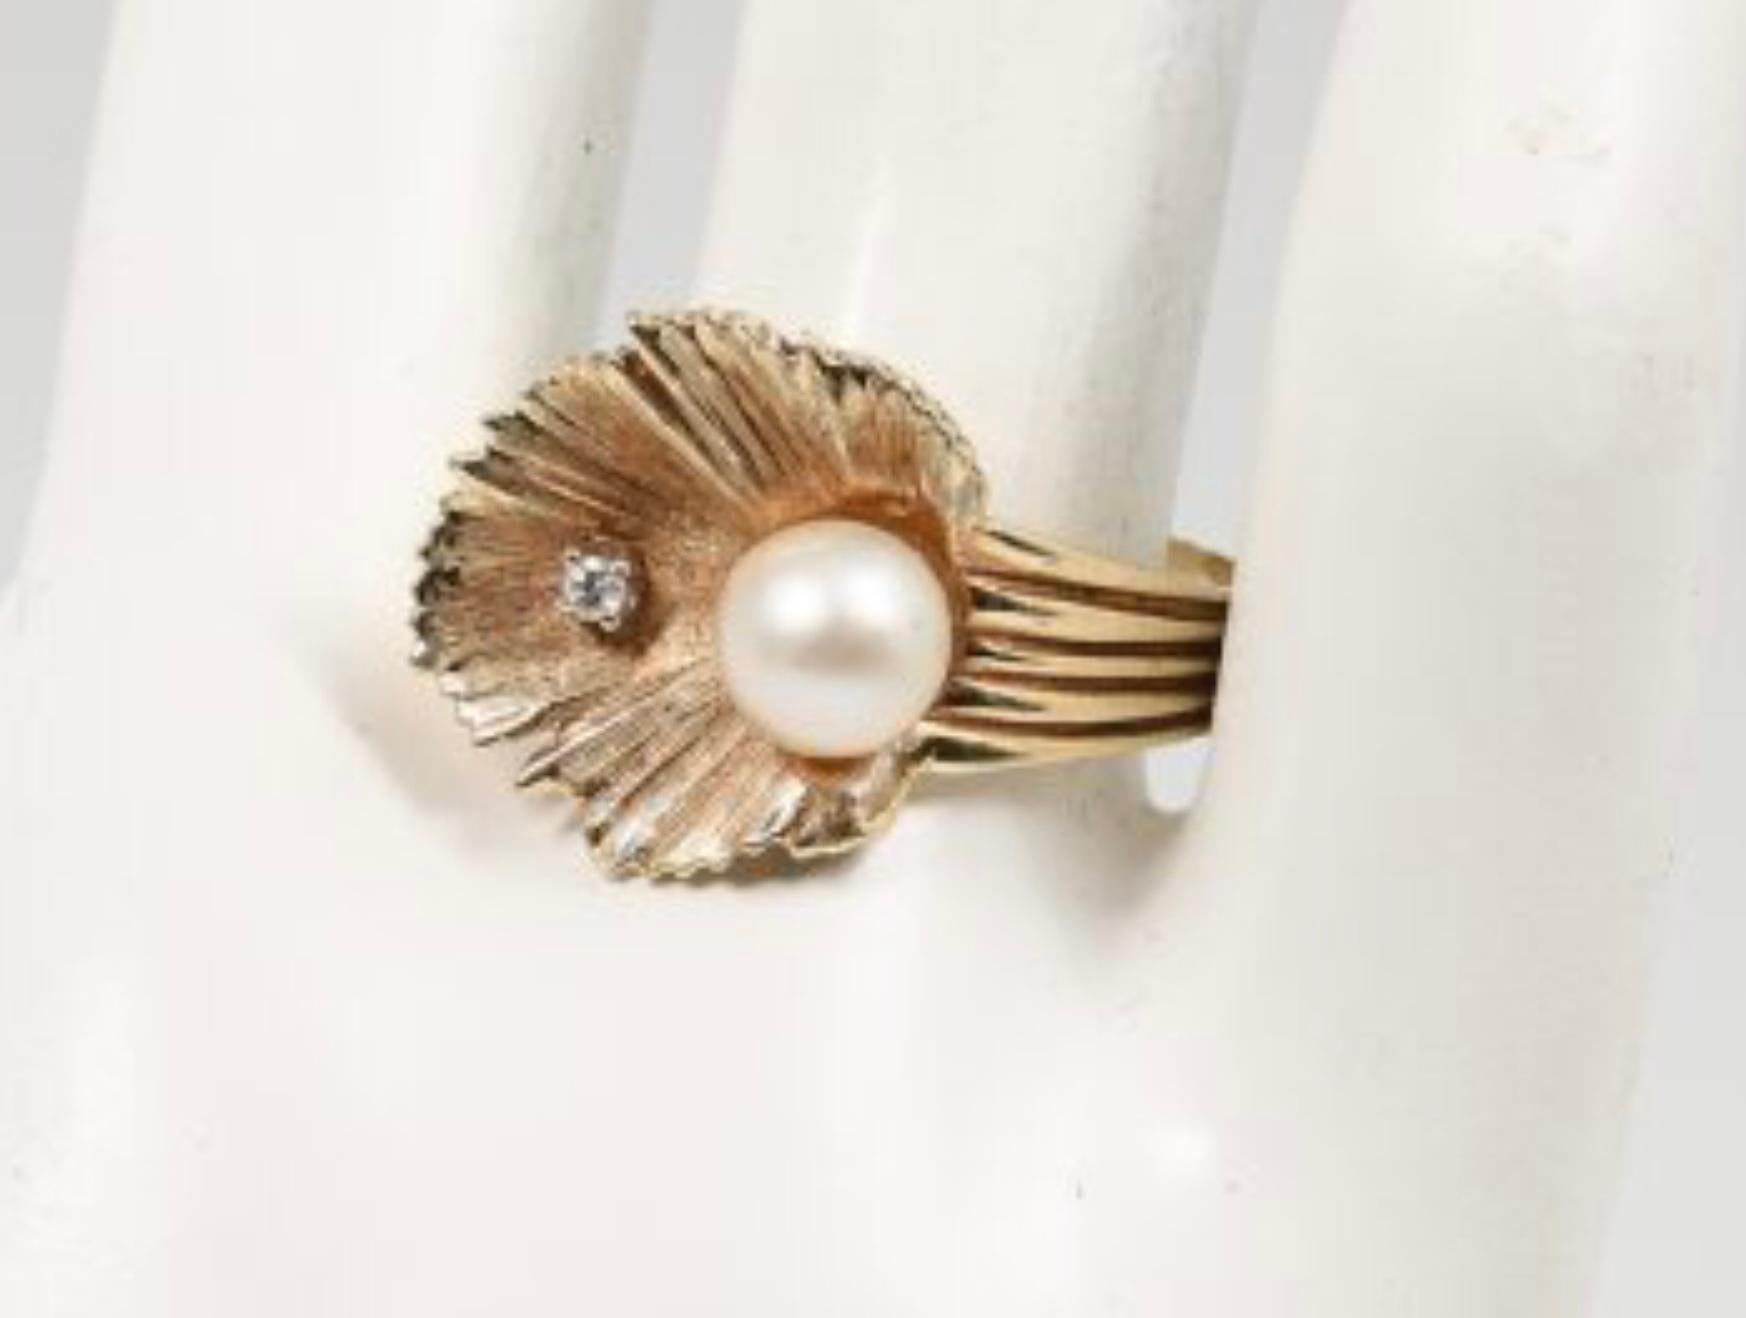 14K Pearl And Diamond Ring. 14K yellow gold ring contains 1 round brilliant cut diamond. WEIGHT: .02 Ct. Approx. Rated SI in clarity and H-I in color.  One 7.00 mm cultured pearl is epoxy set. the diamond is prong set. Weight: 5.7 grams.  Size: 10